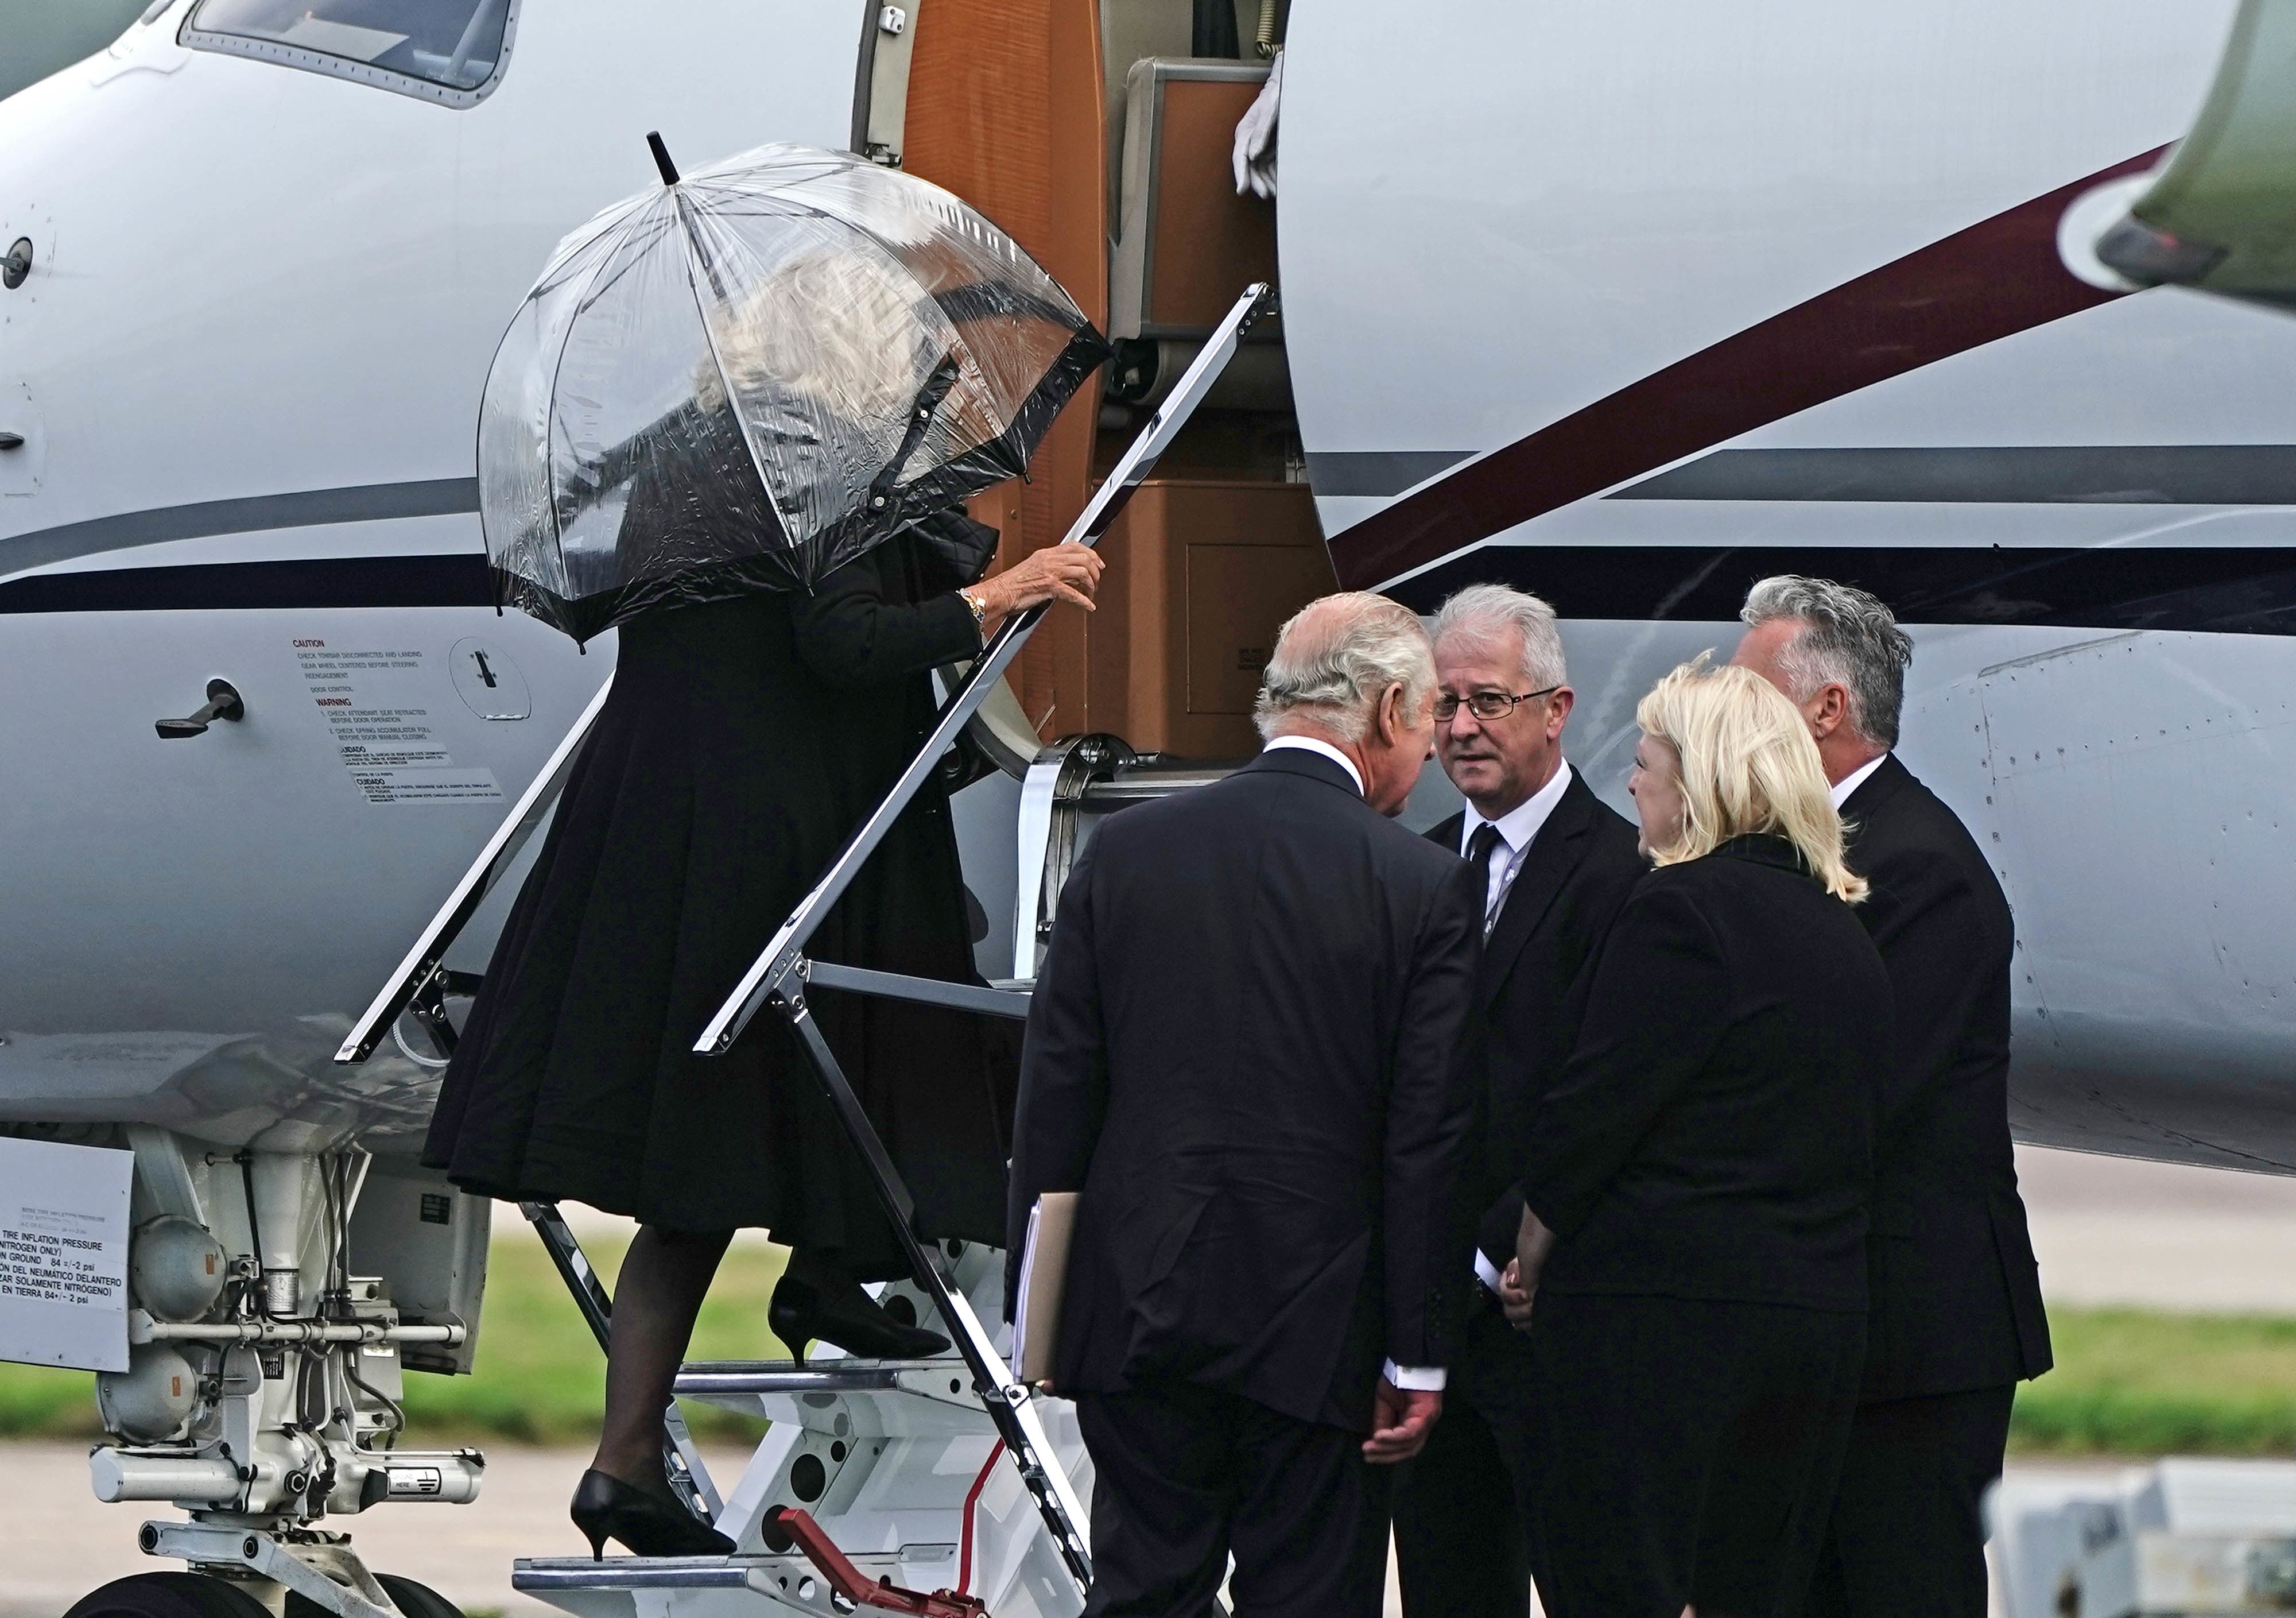 King Charles III and the Queen boarding a plane at Aberdeen Airport (Aaron Chown/PA)